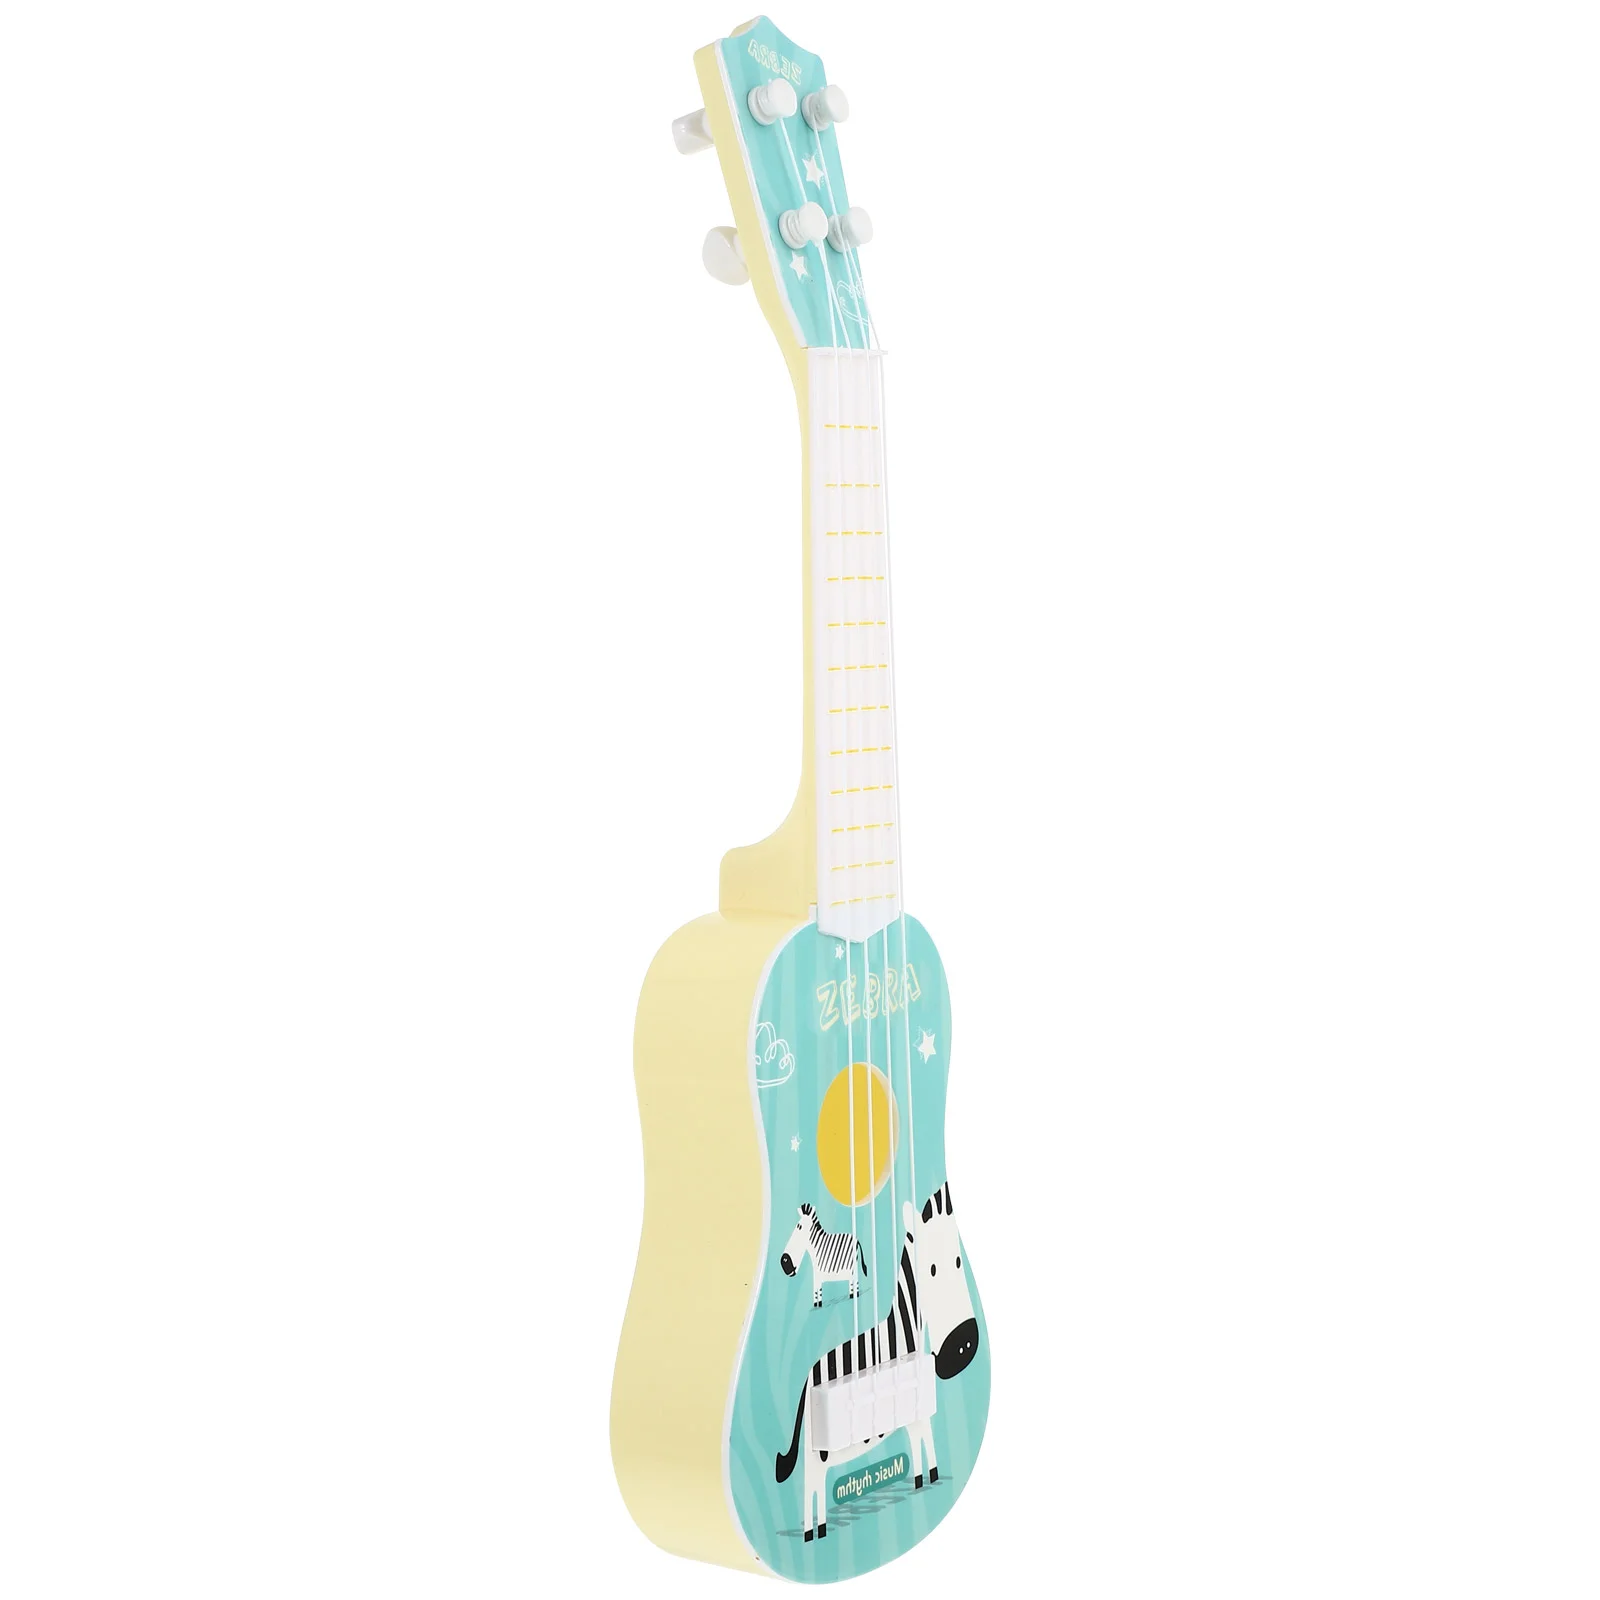 

Children's Ukulele Played Early Musical Learning Toy Mini Guitar Plaything Instrument Model